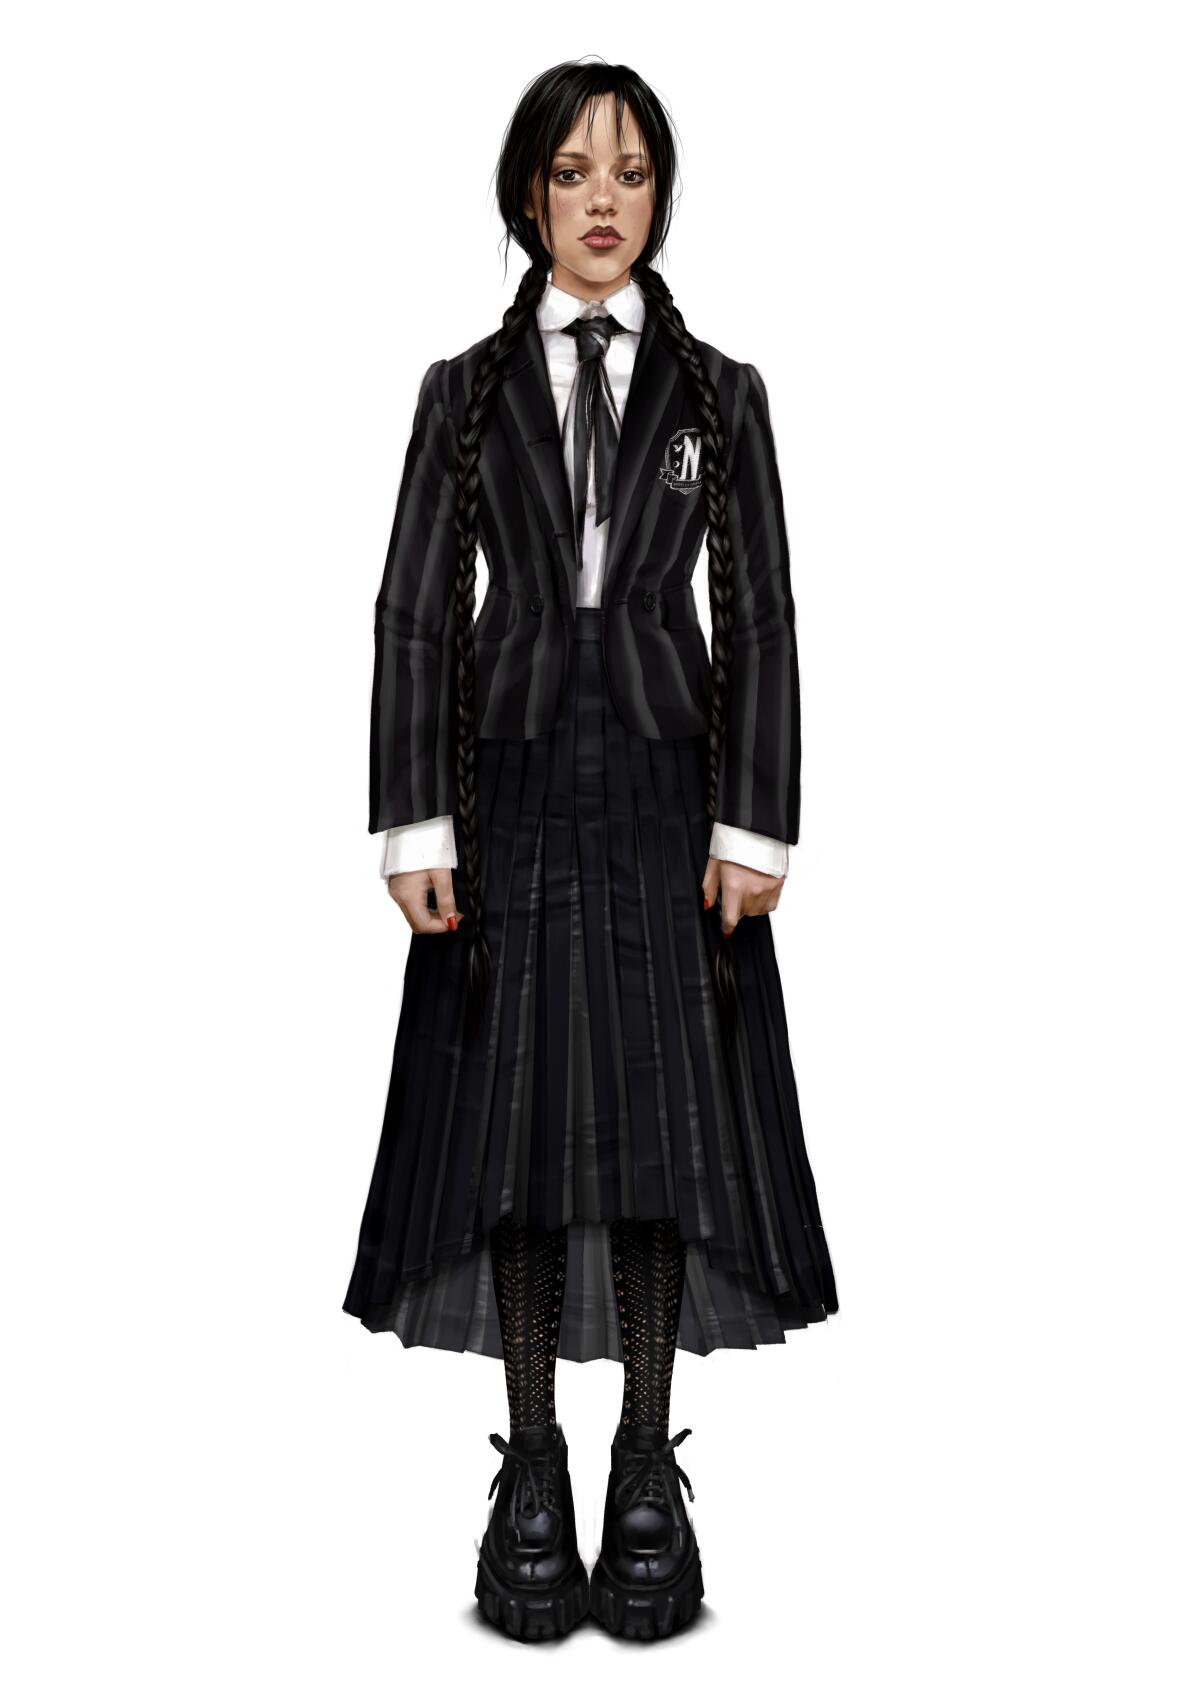 Wednesday Adams Gothic Teenager Full Body Black Outfit Dress